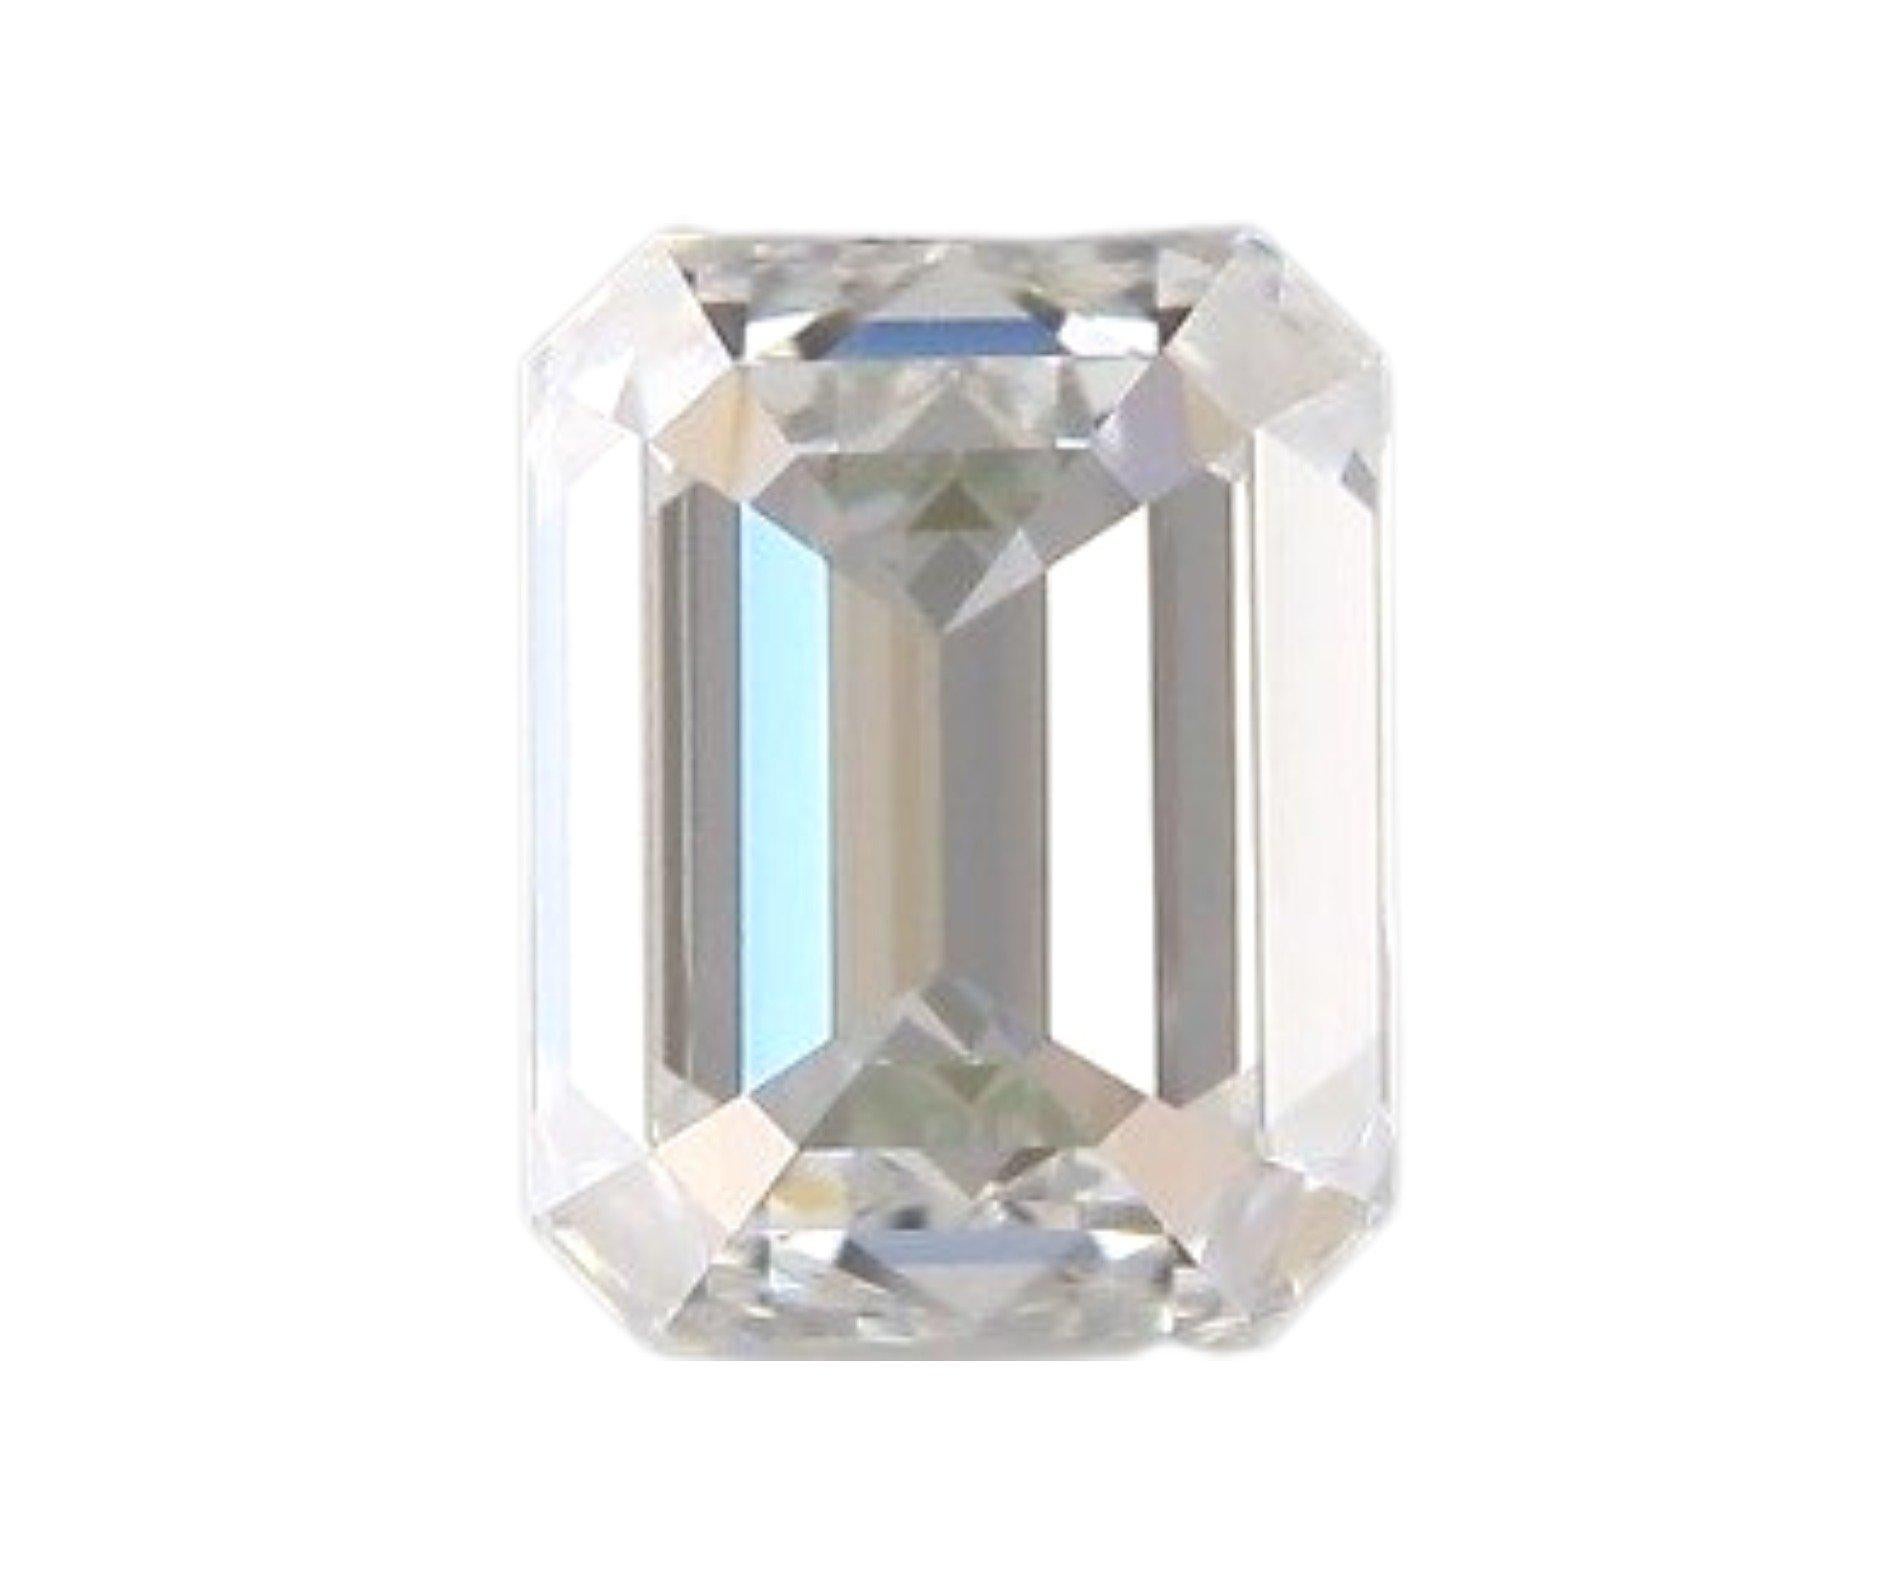 Natural emerald cut diamonds in a 0.81 carat I IF with Beautiful cut and shine. These diamonds comes with an GIA Certificate and laser inscription number.

MKN-190 & MKN-191

GIA 6392564930 & 7408056858